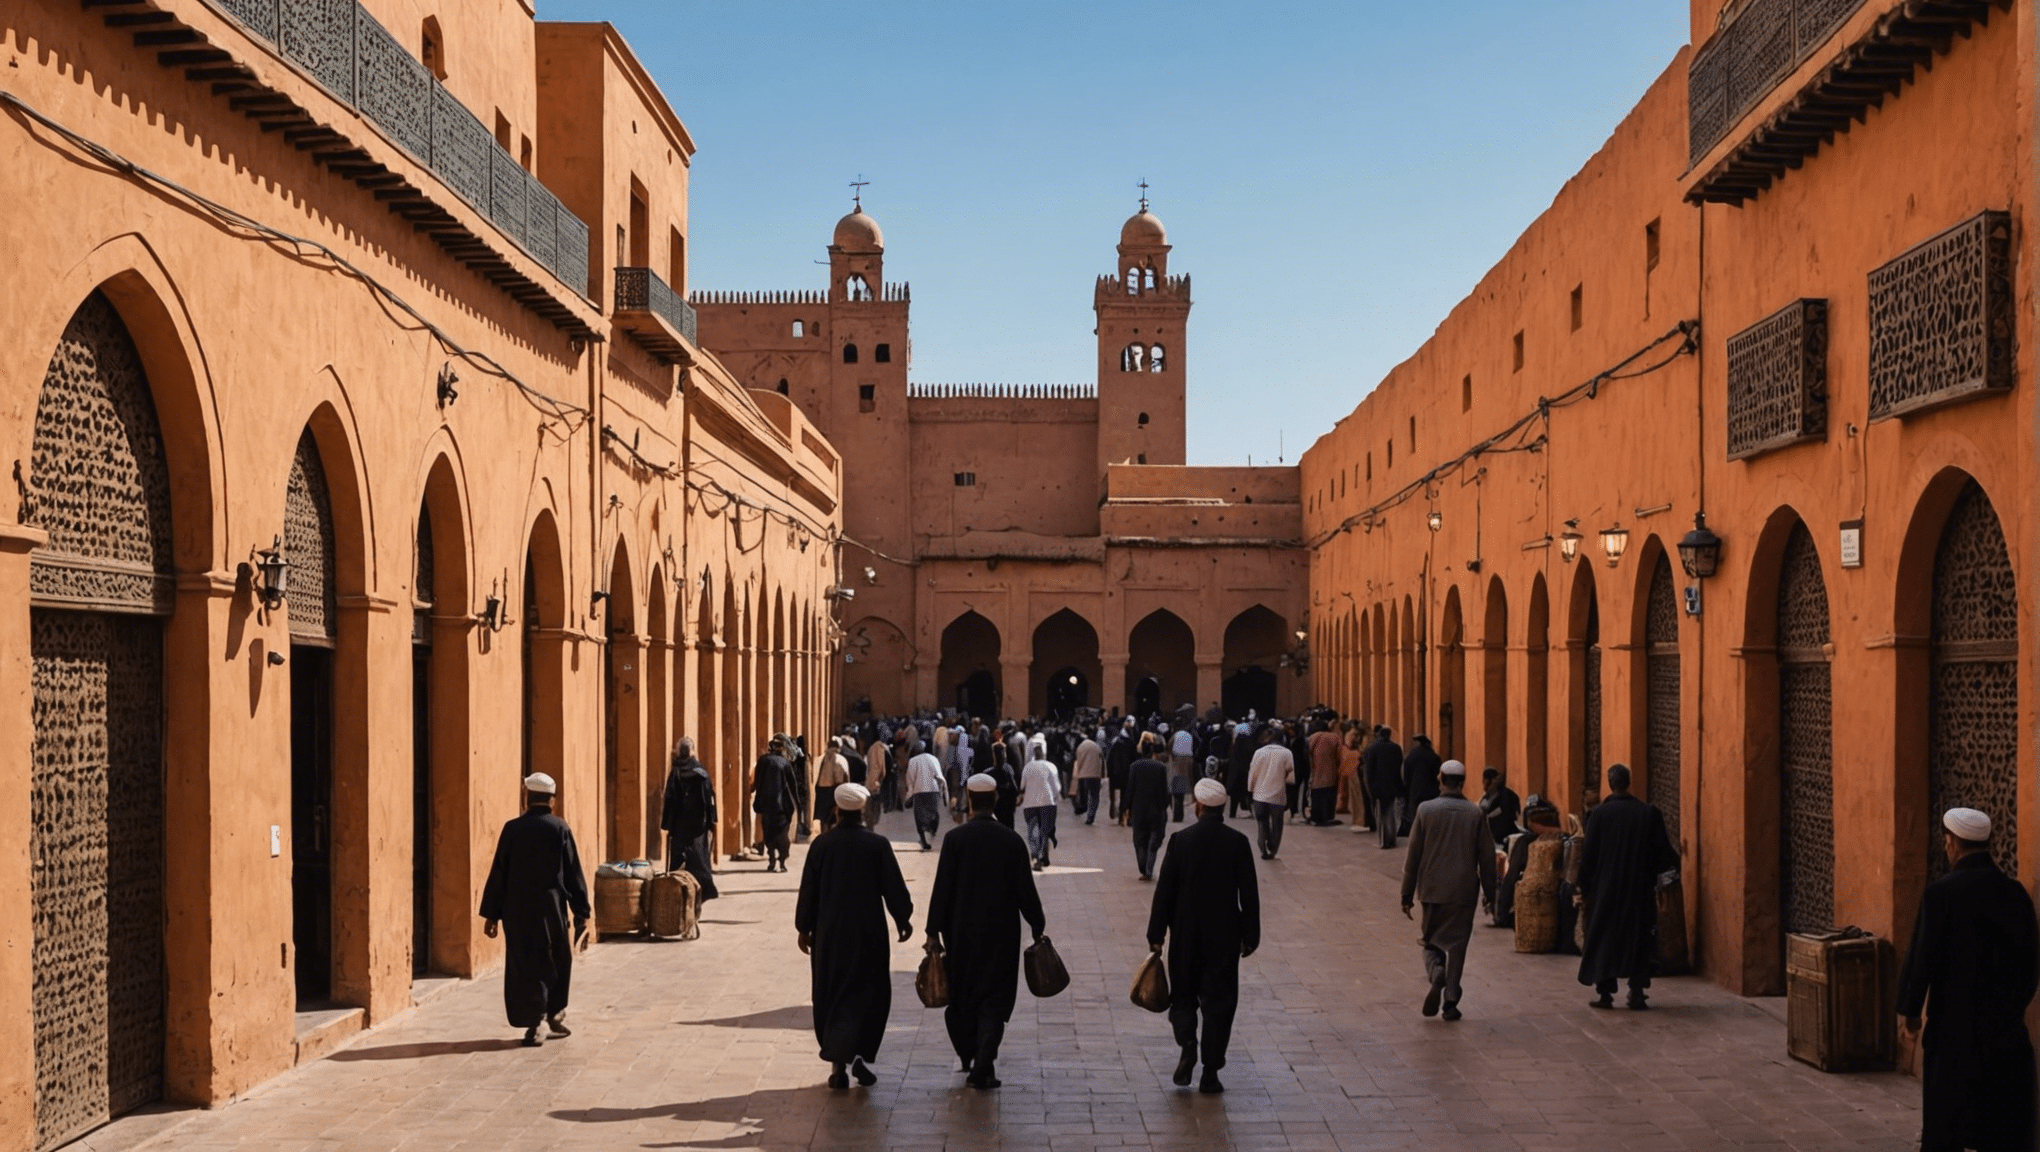 discover the best way to reach the medina from marrakech airport and start your adventure in morocco hassle-free!